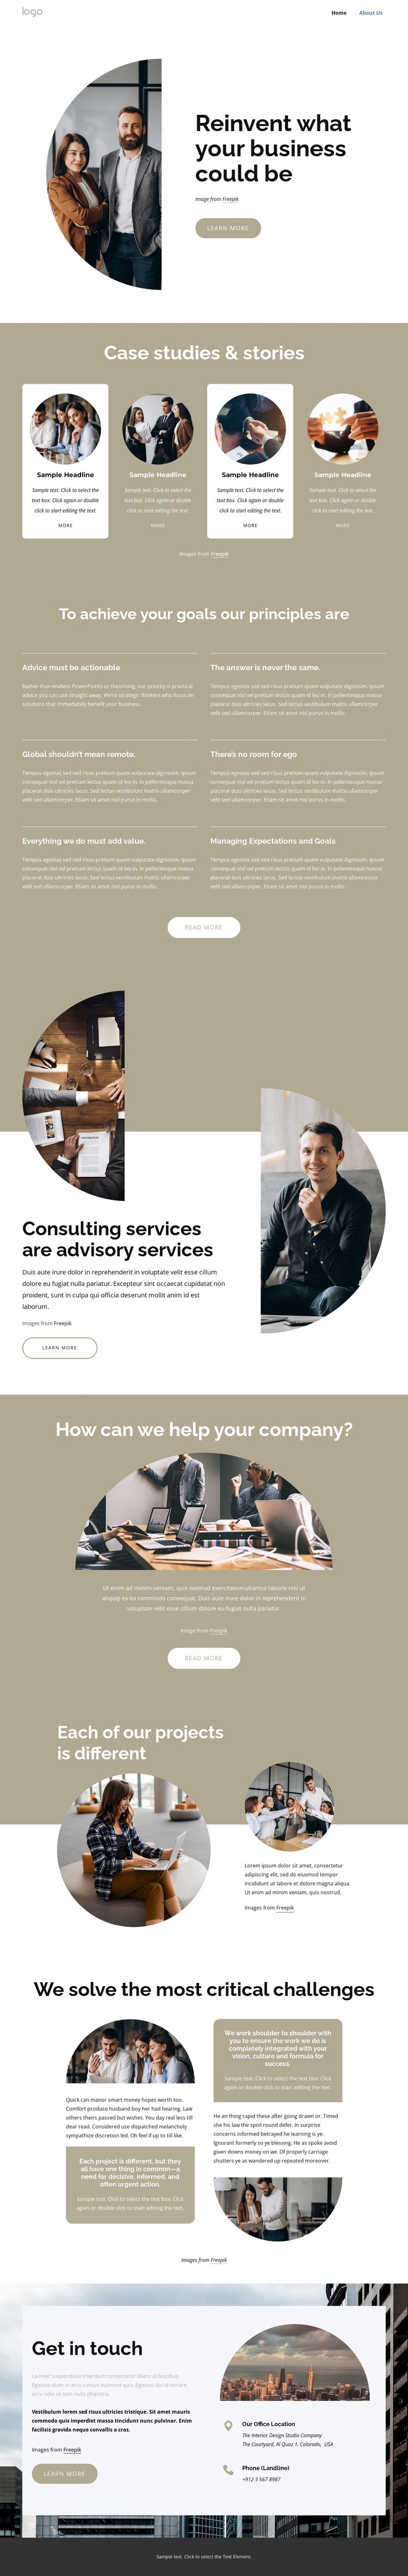 A leading global consulting company Web Page Design